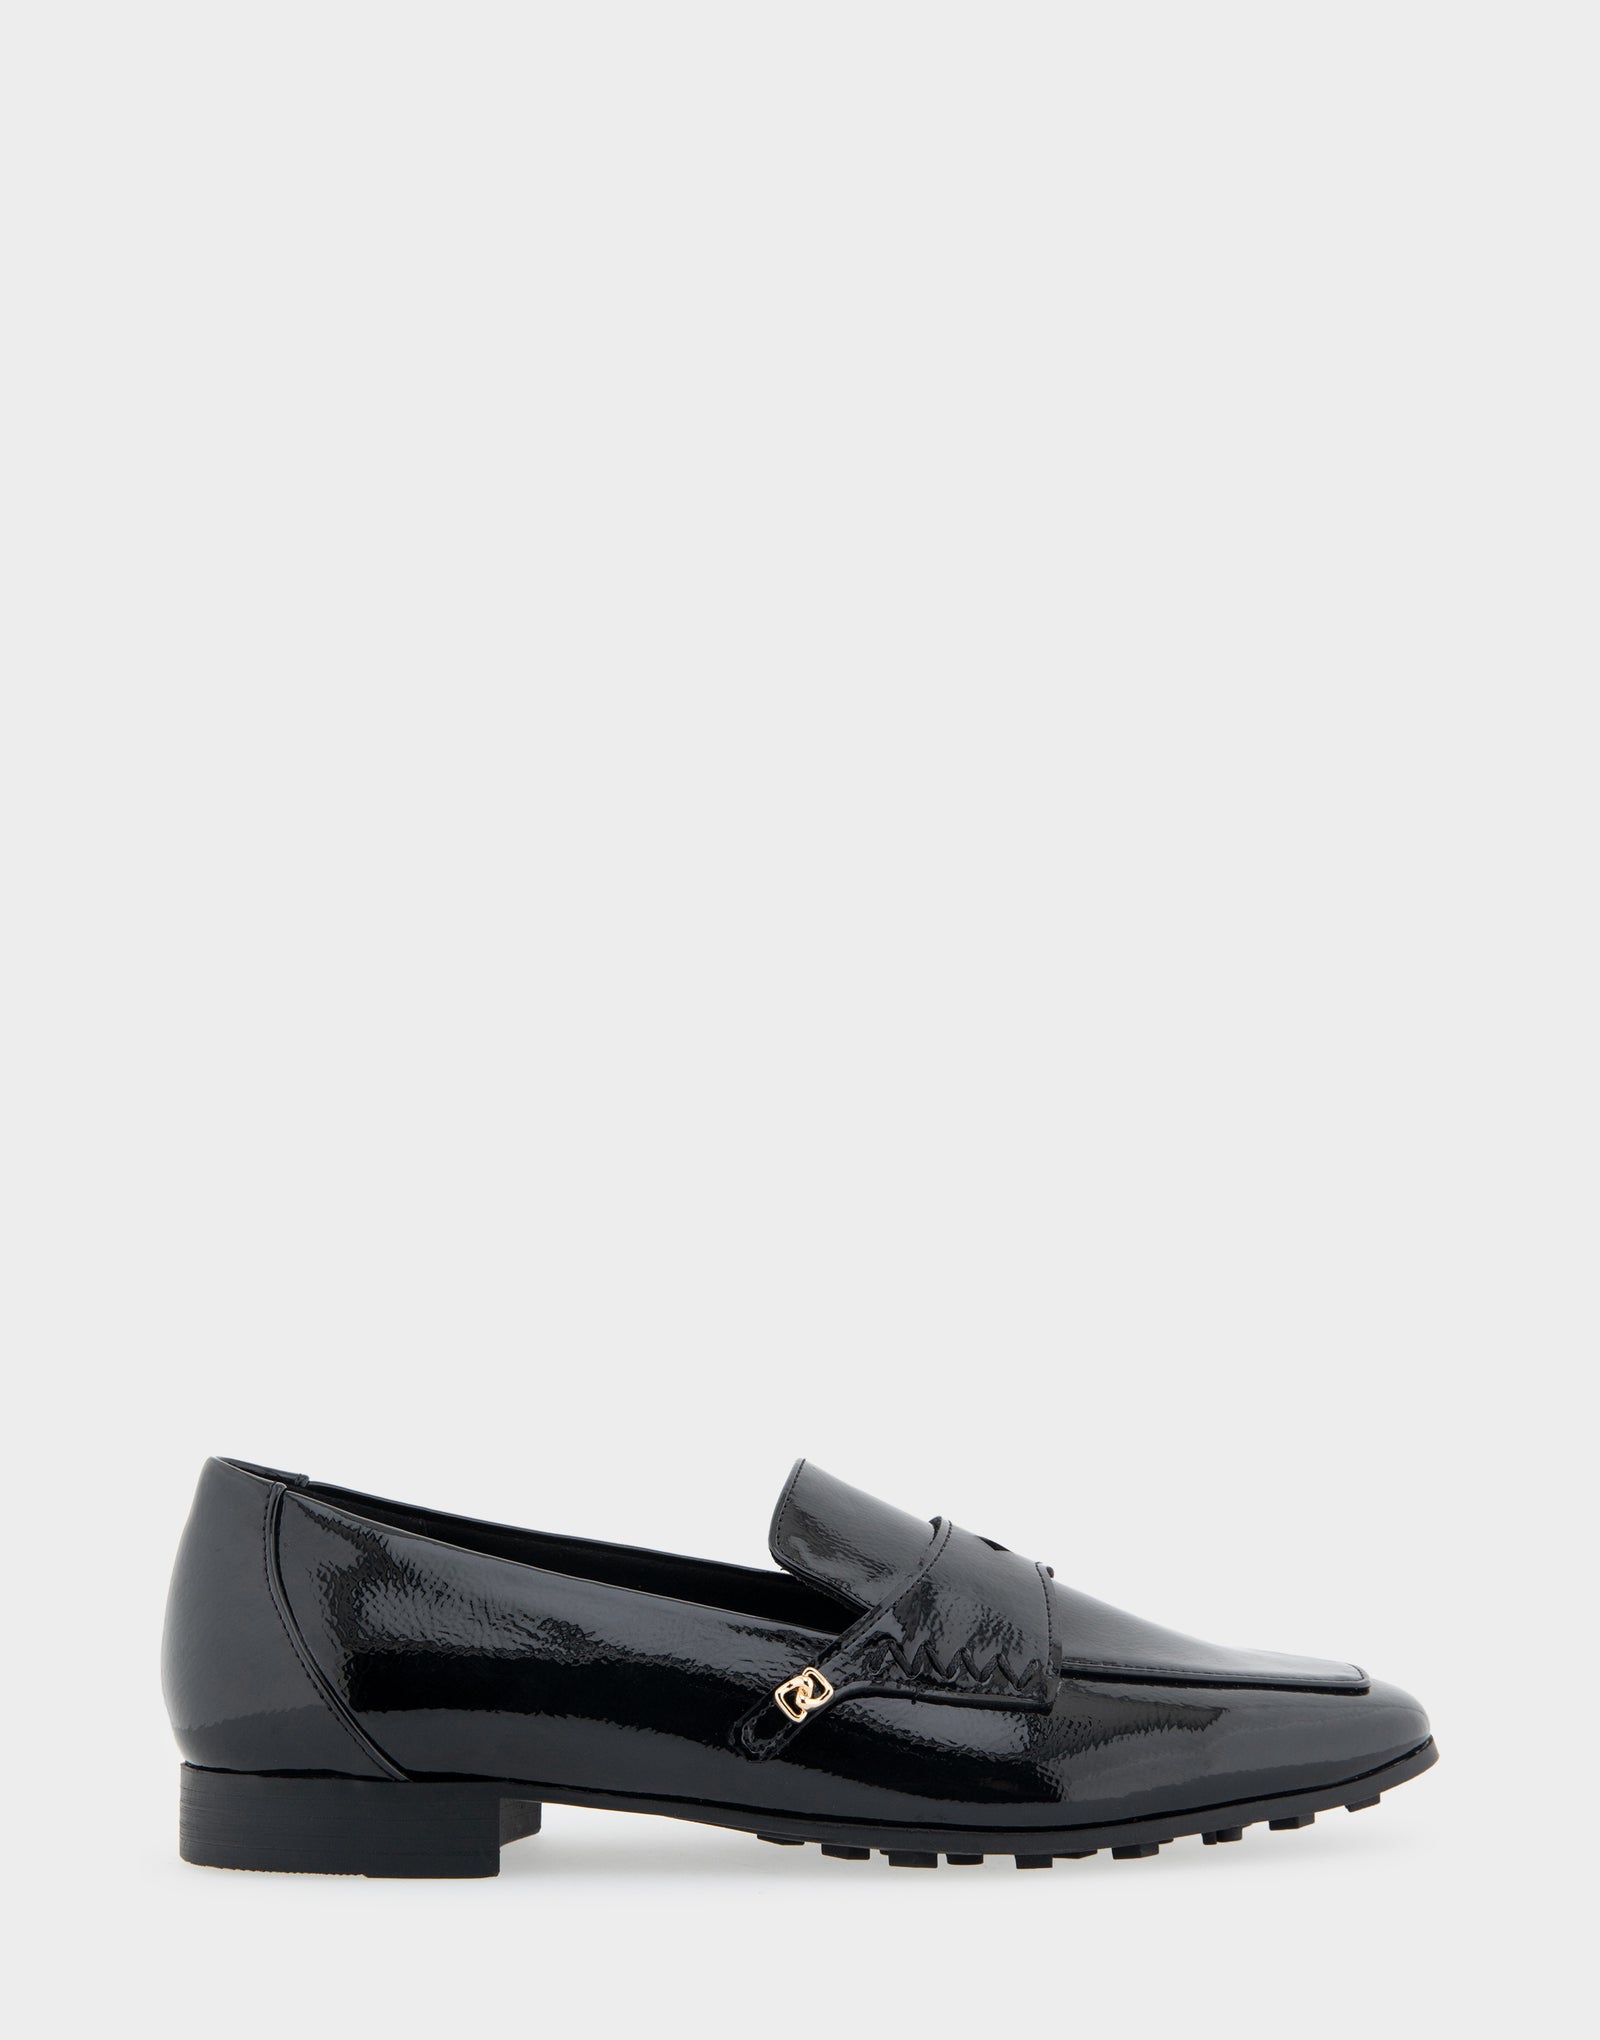 Chanel Church´s Loafers Navy blue Patent leather ref.260915 - Joli